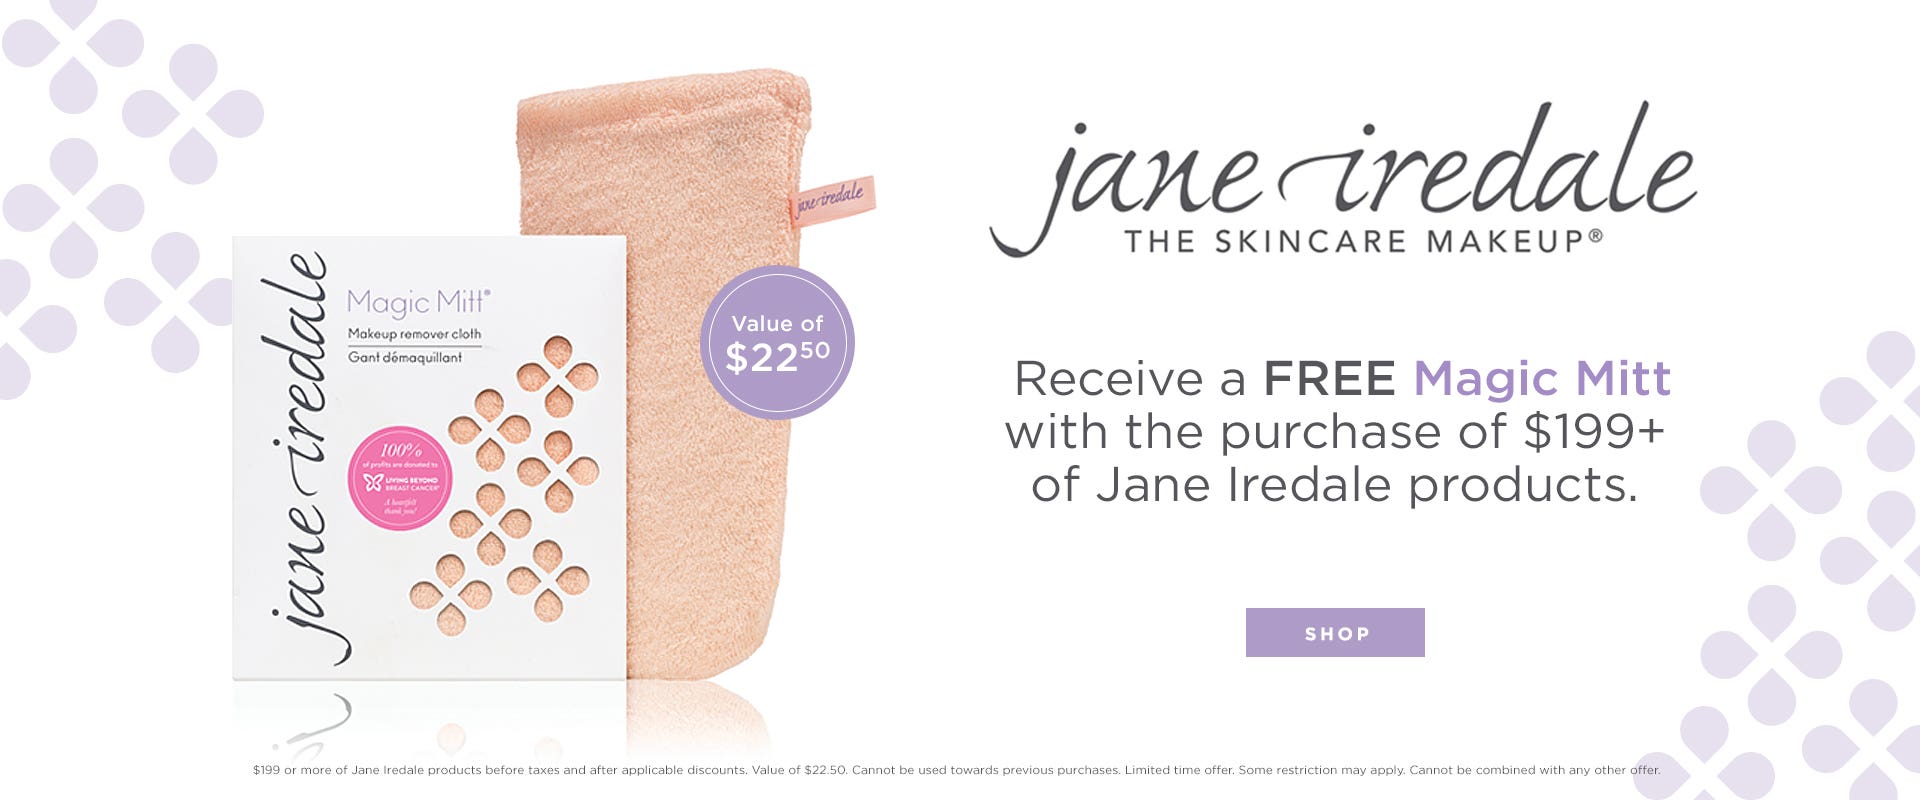 Receive a FREE Magic Mitt with the purchase of $199+ of Jane Iredale products.